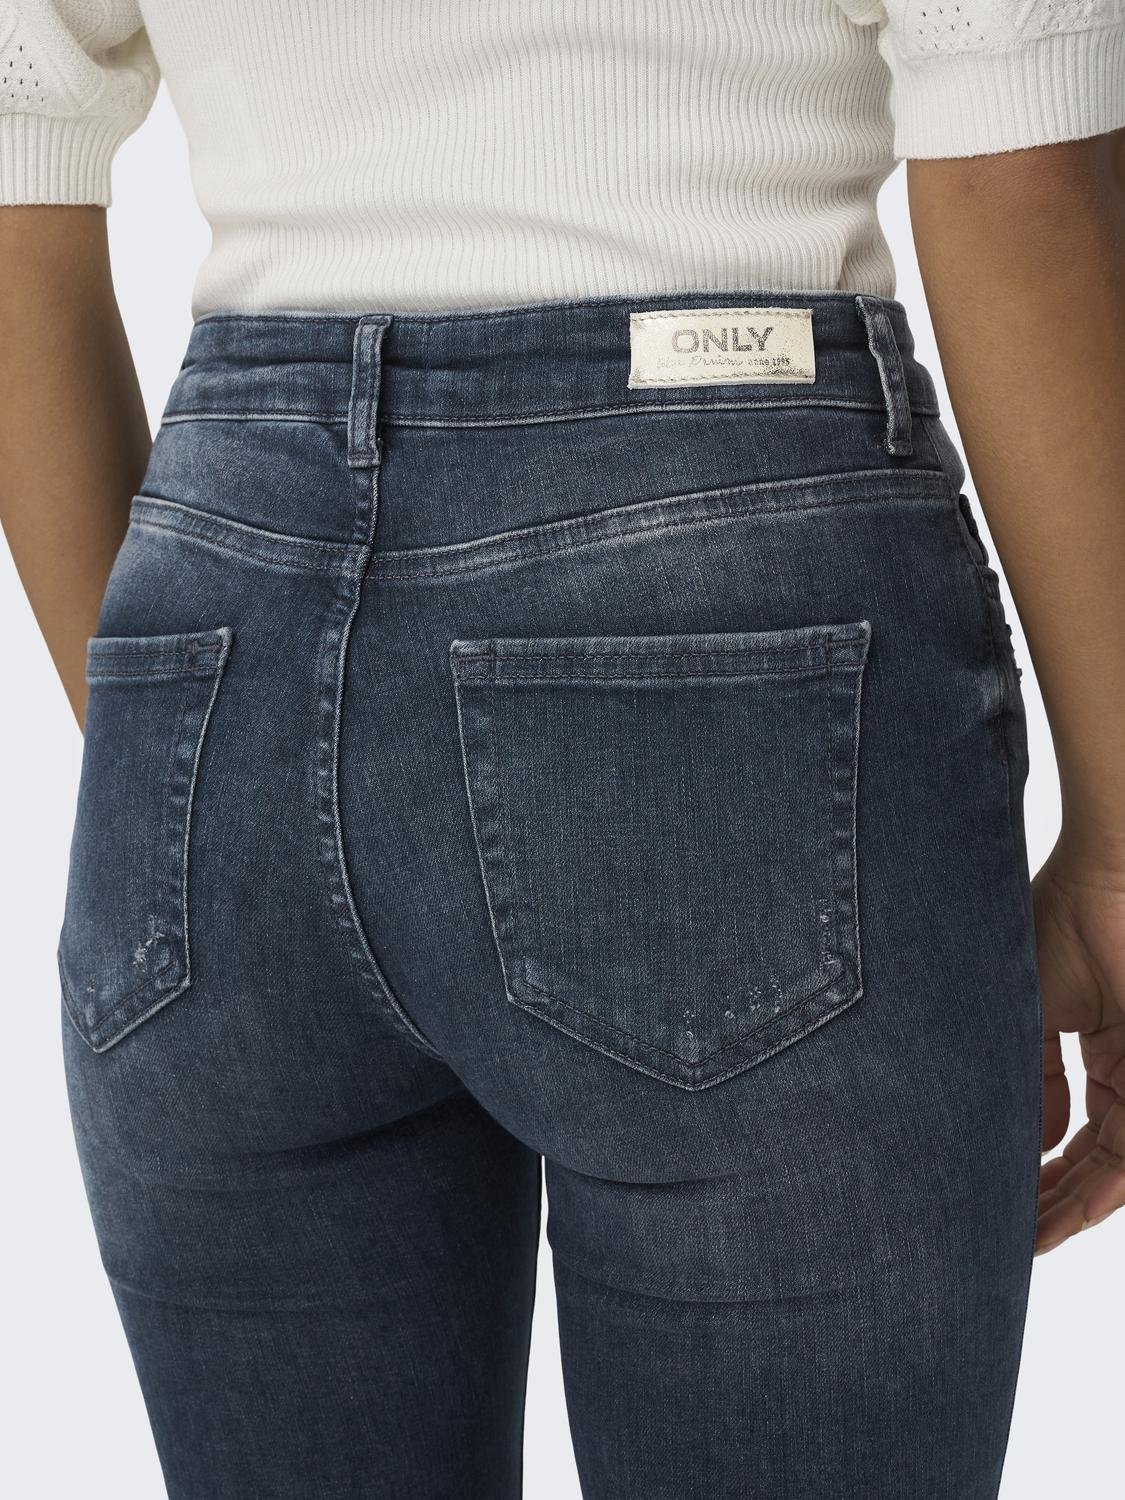 20% with Jeans | Regular waist ONLY® Skinny Fit discount!